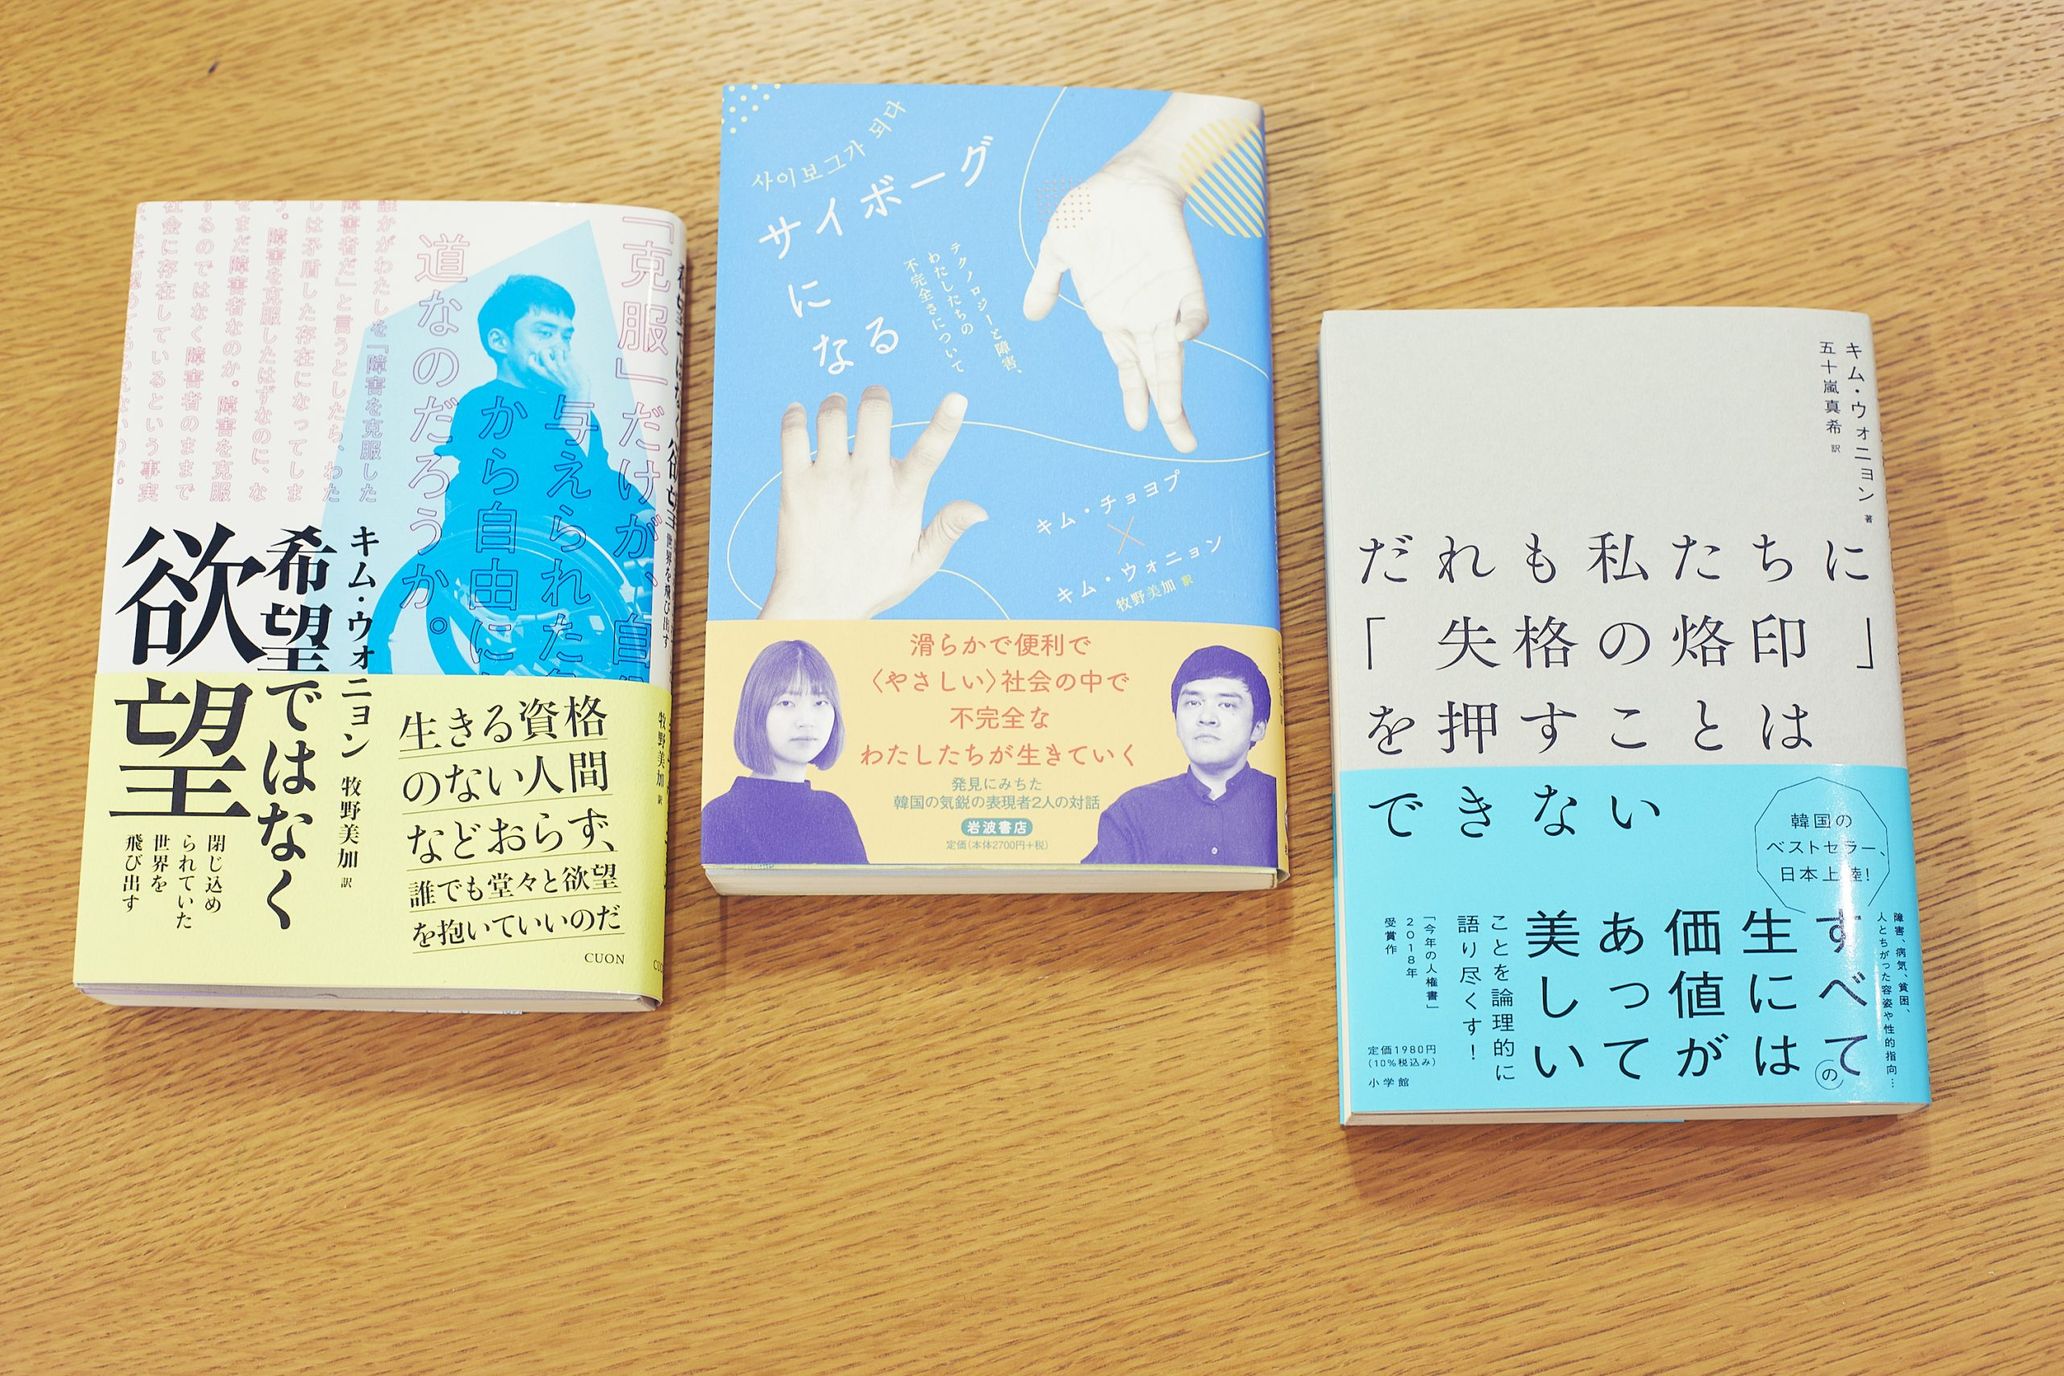 Three books by Kim Won-young in Japanese